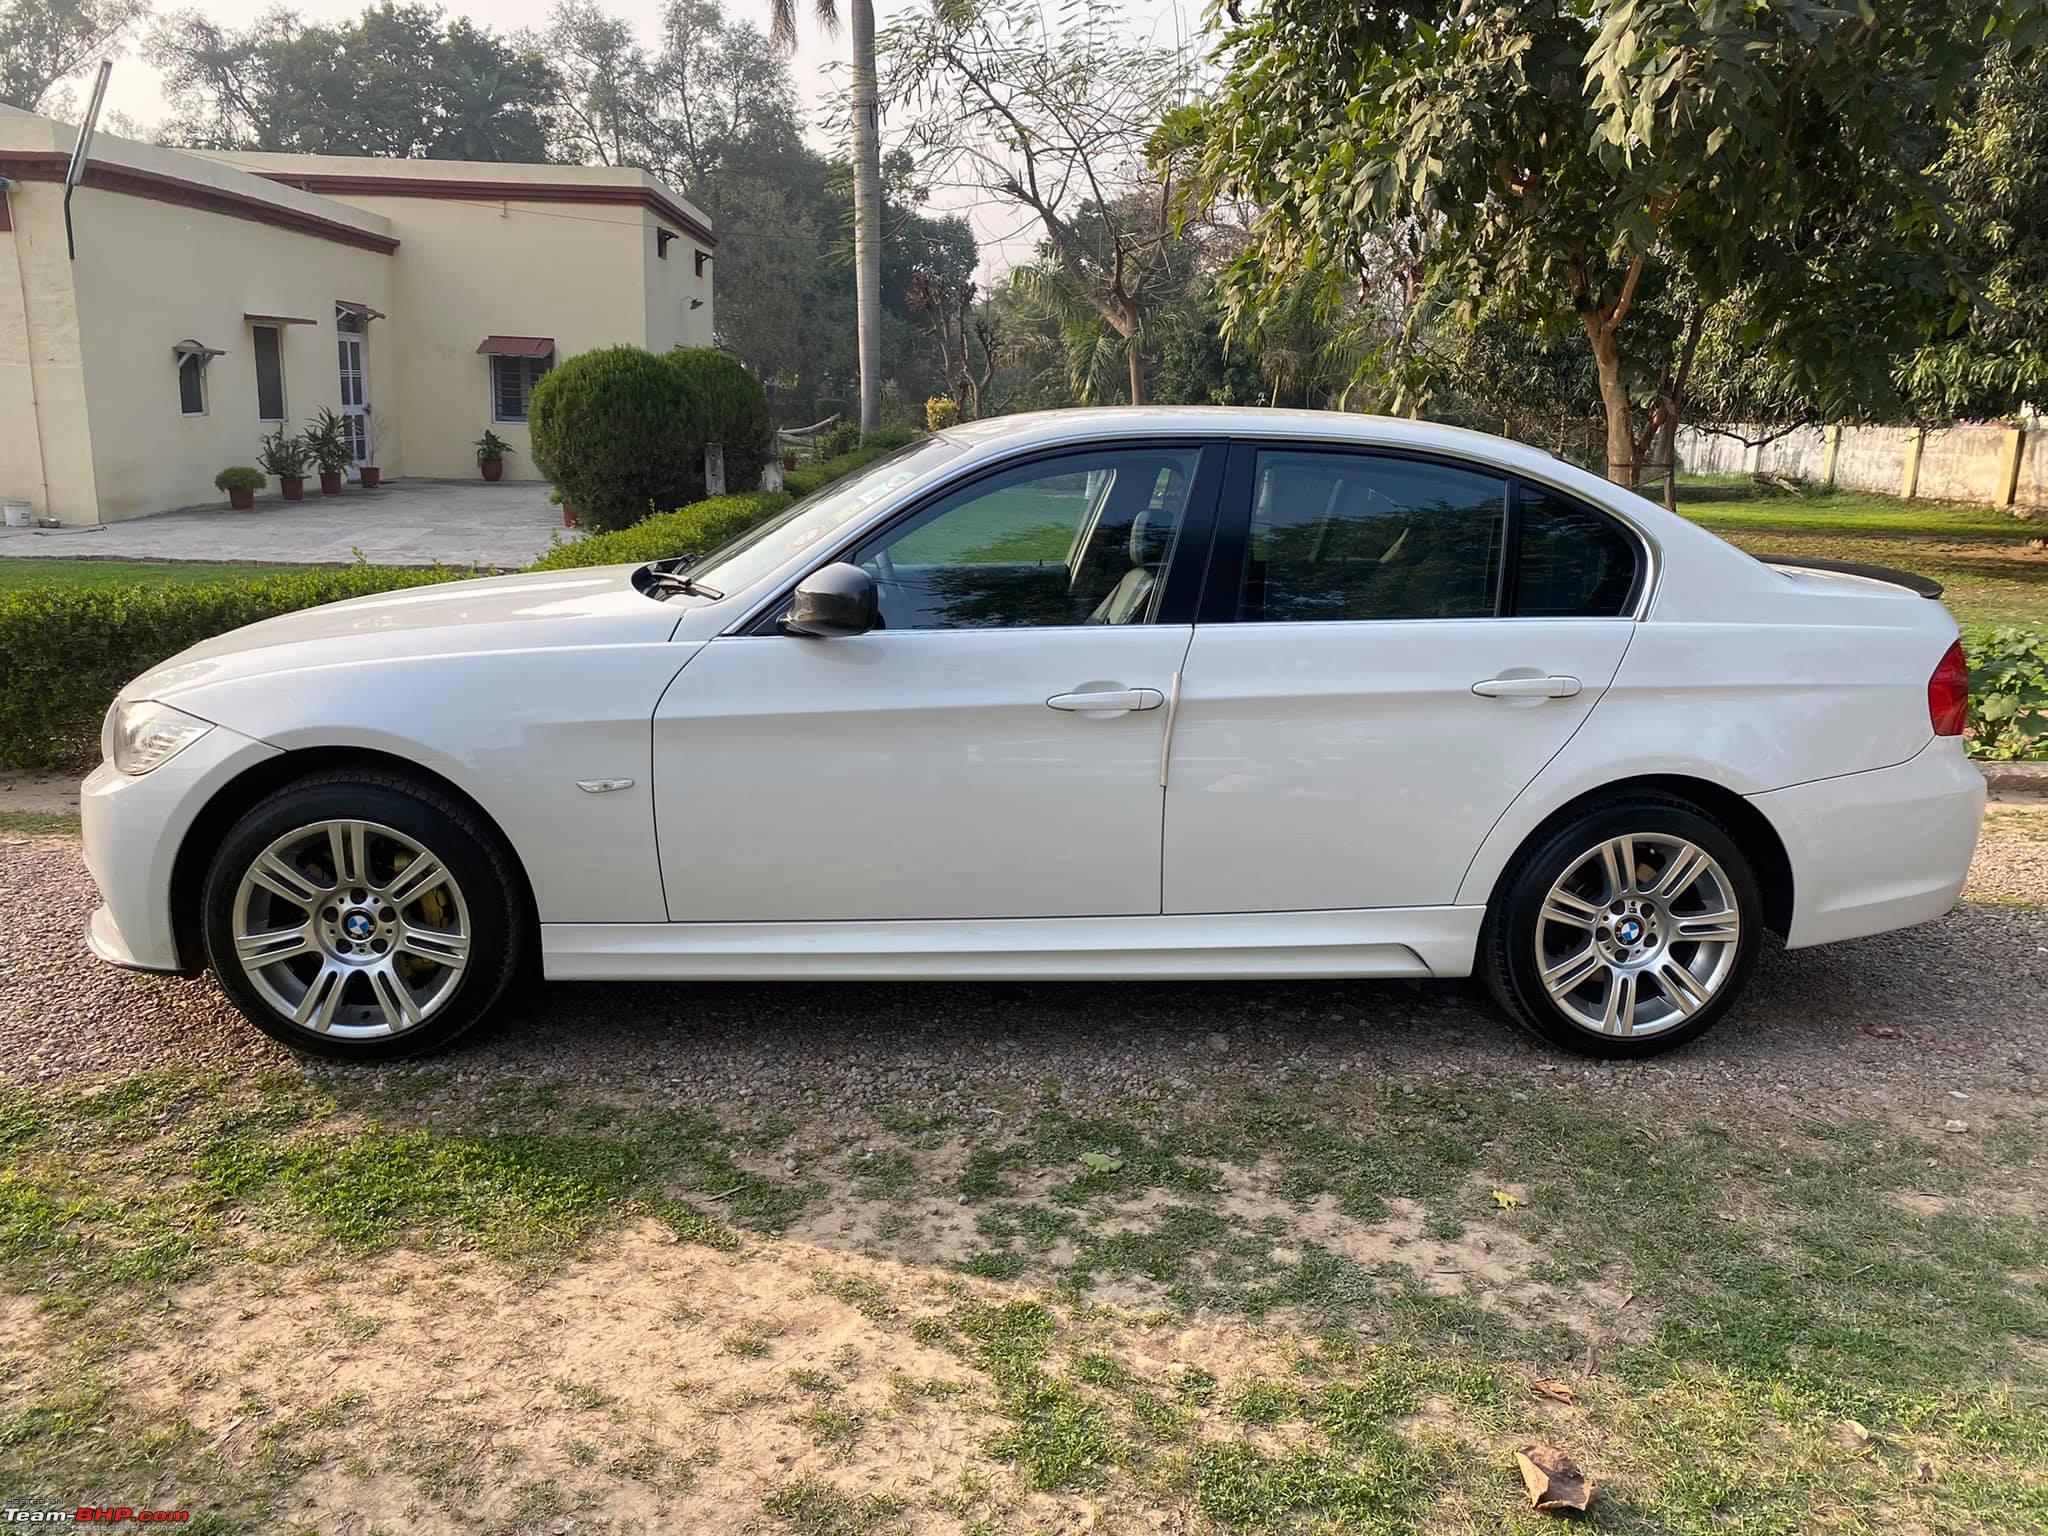 How to Buy a Used BMW E90 3 Series